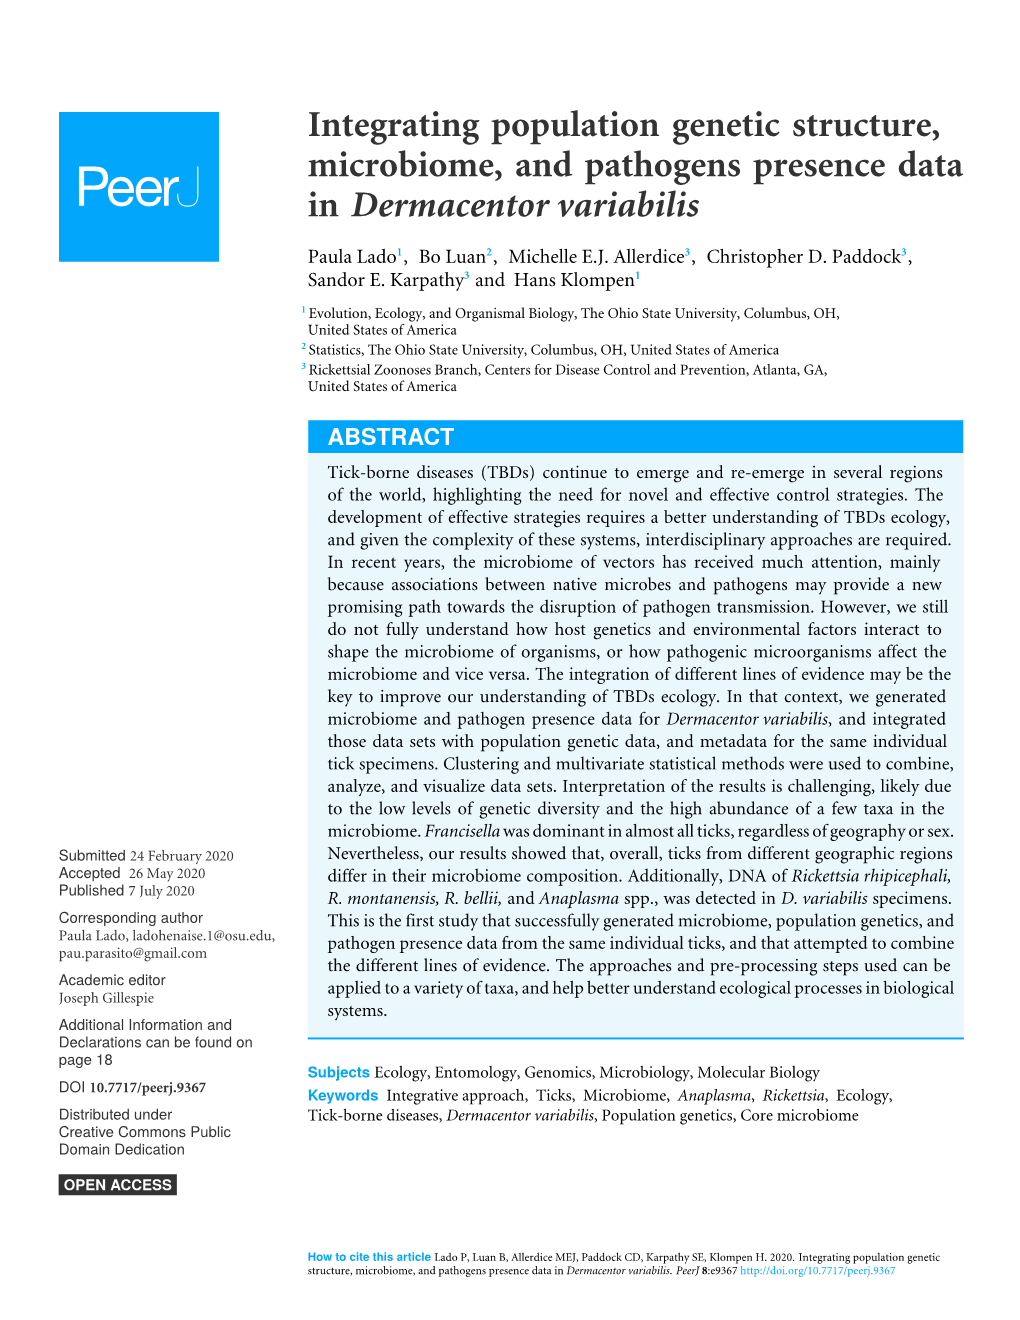 Integrating Population Genetic Structure, Microbiome, and Pathogens Presence Data in Dermacentor Variabilis